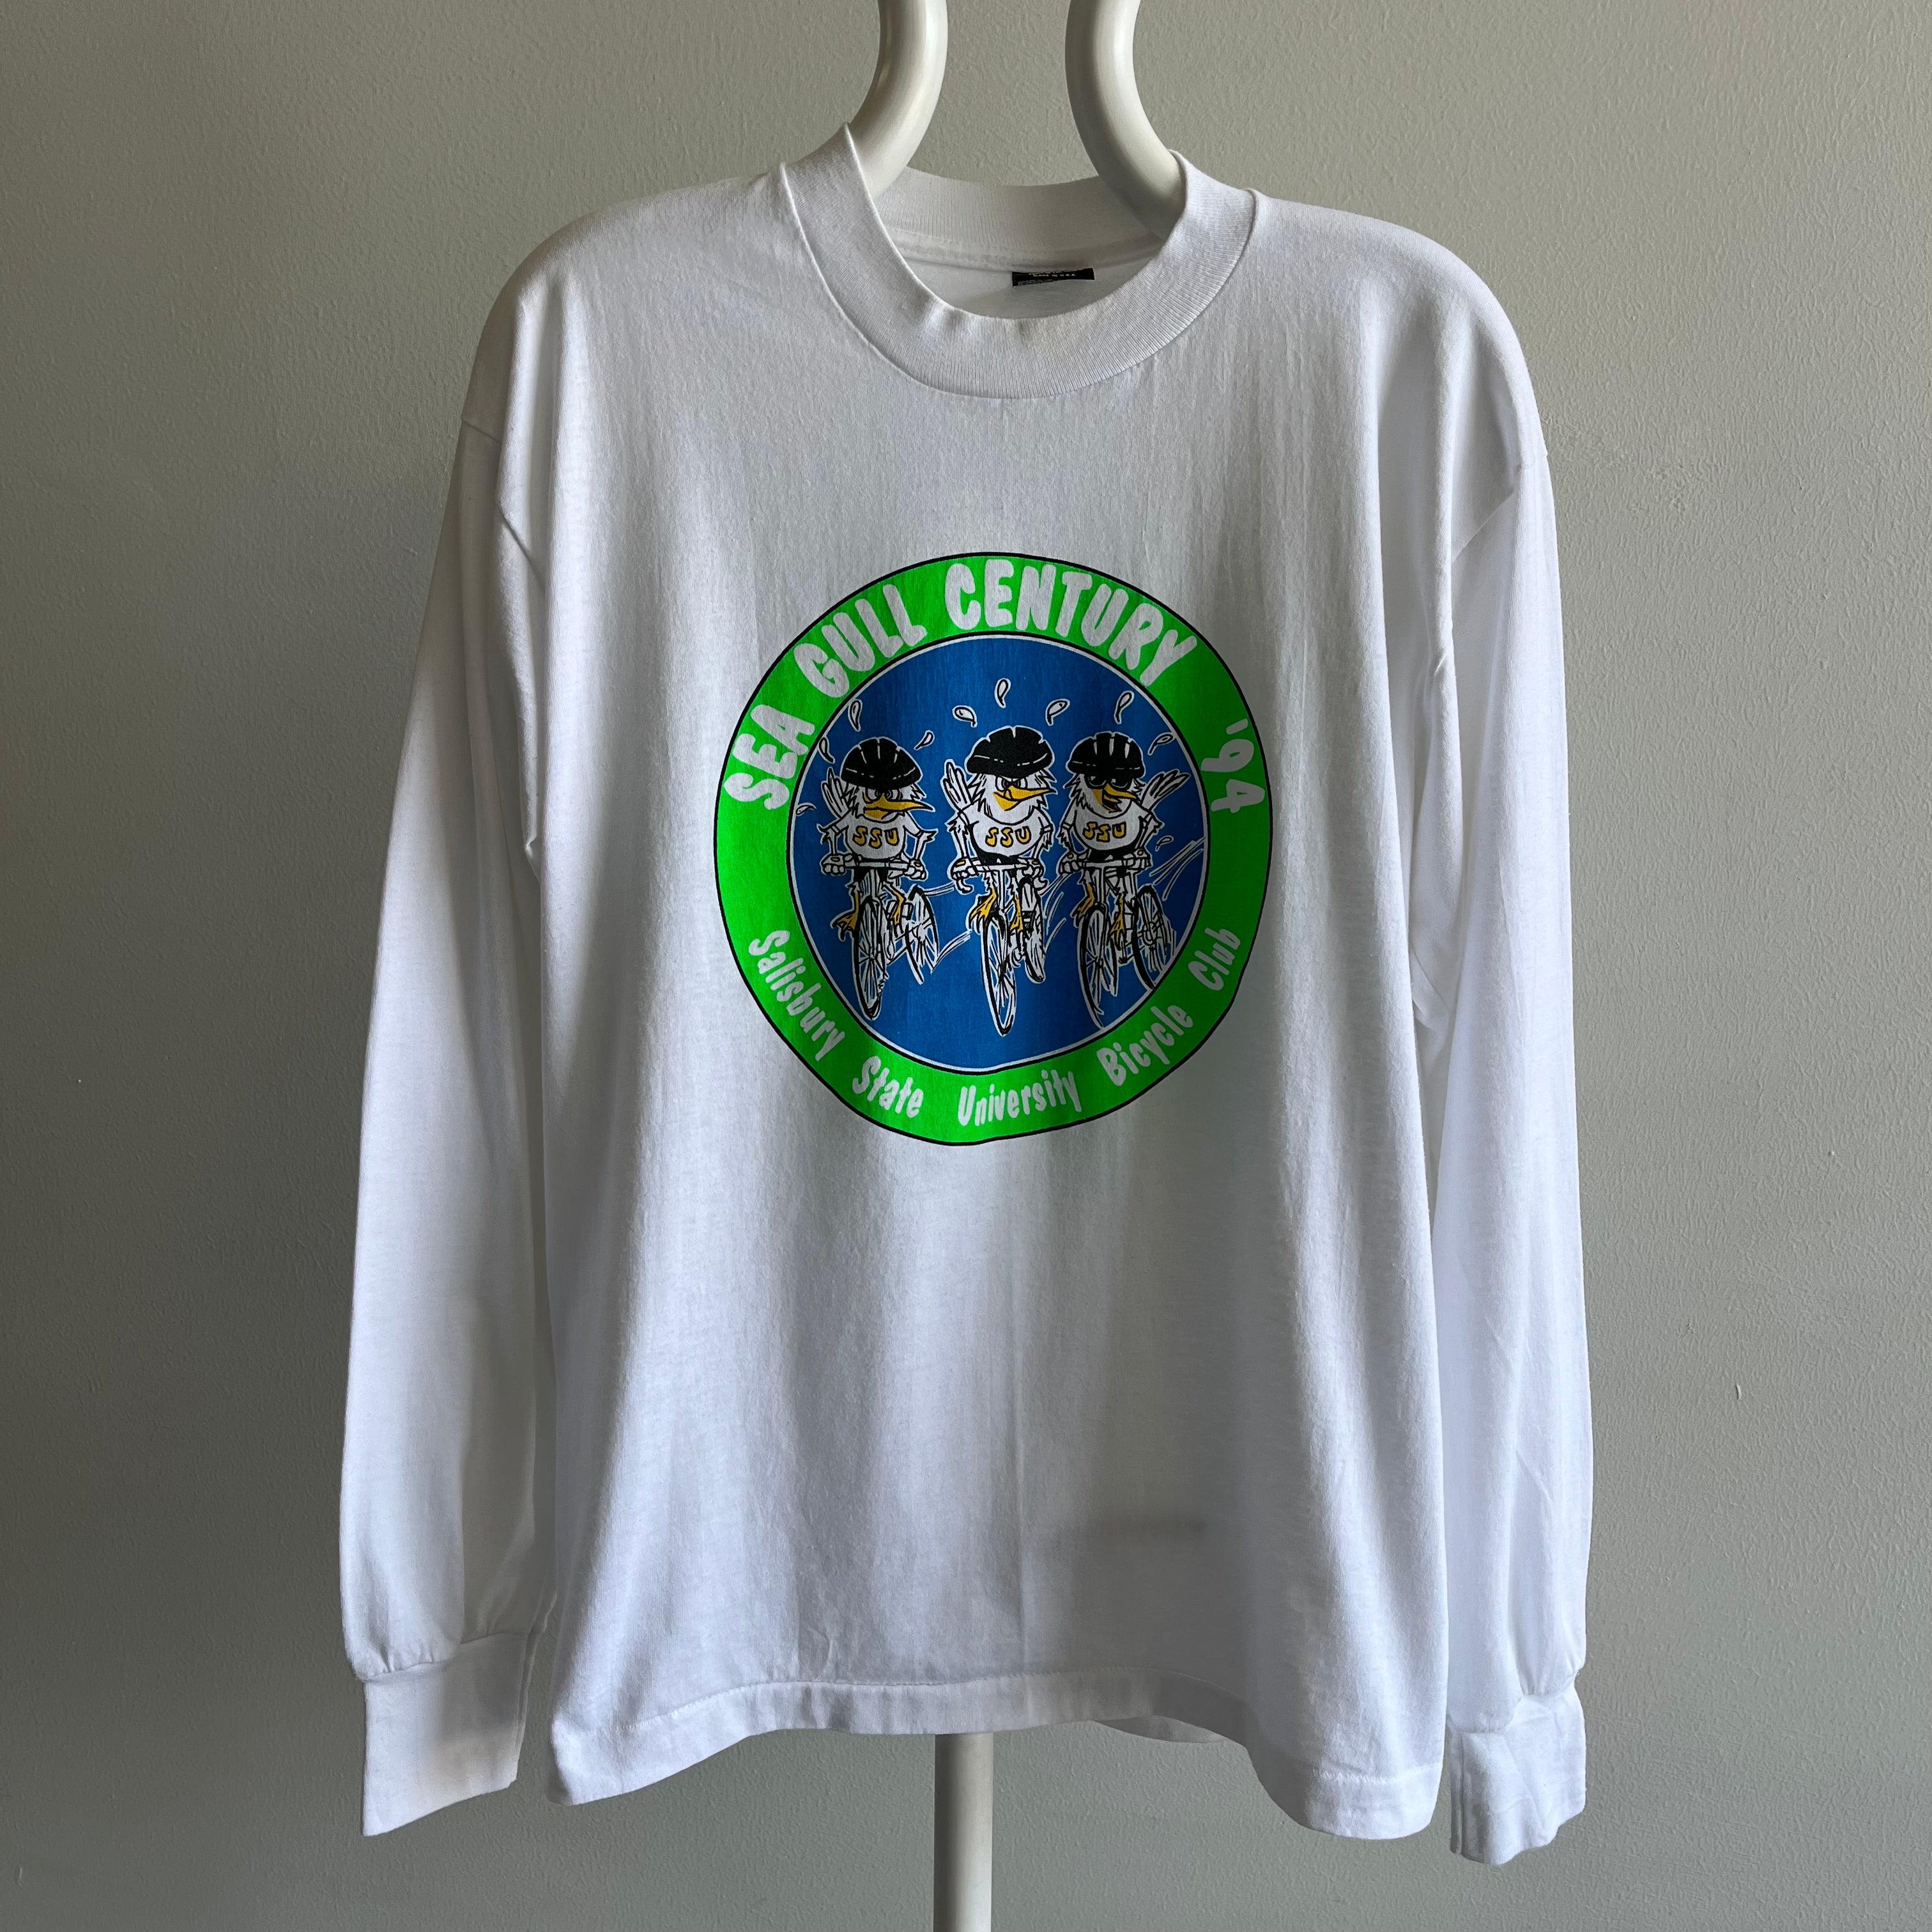 1994 Seagull Century Bike Club Long Sleeve T-Shirt - Front and Back